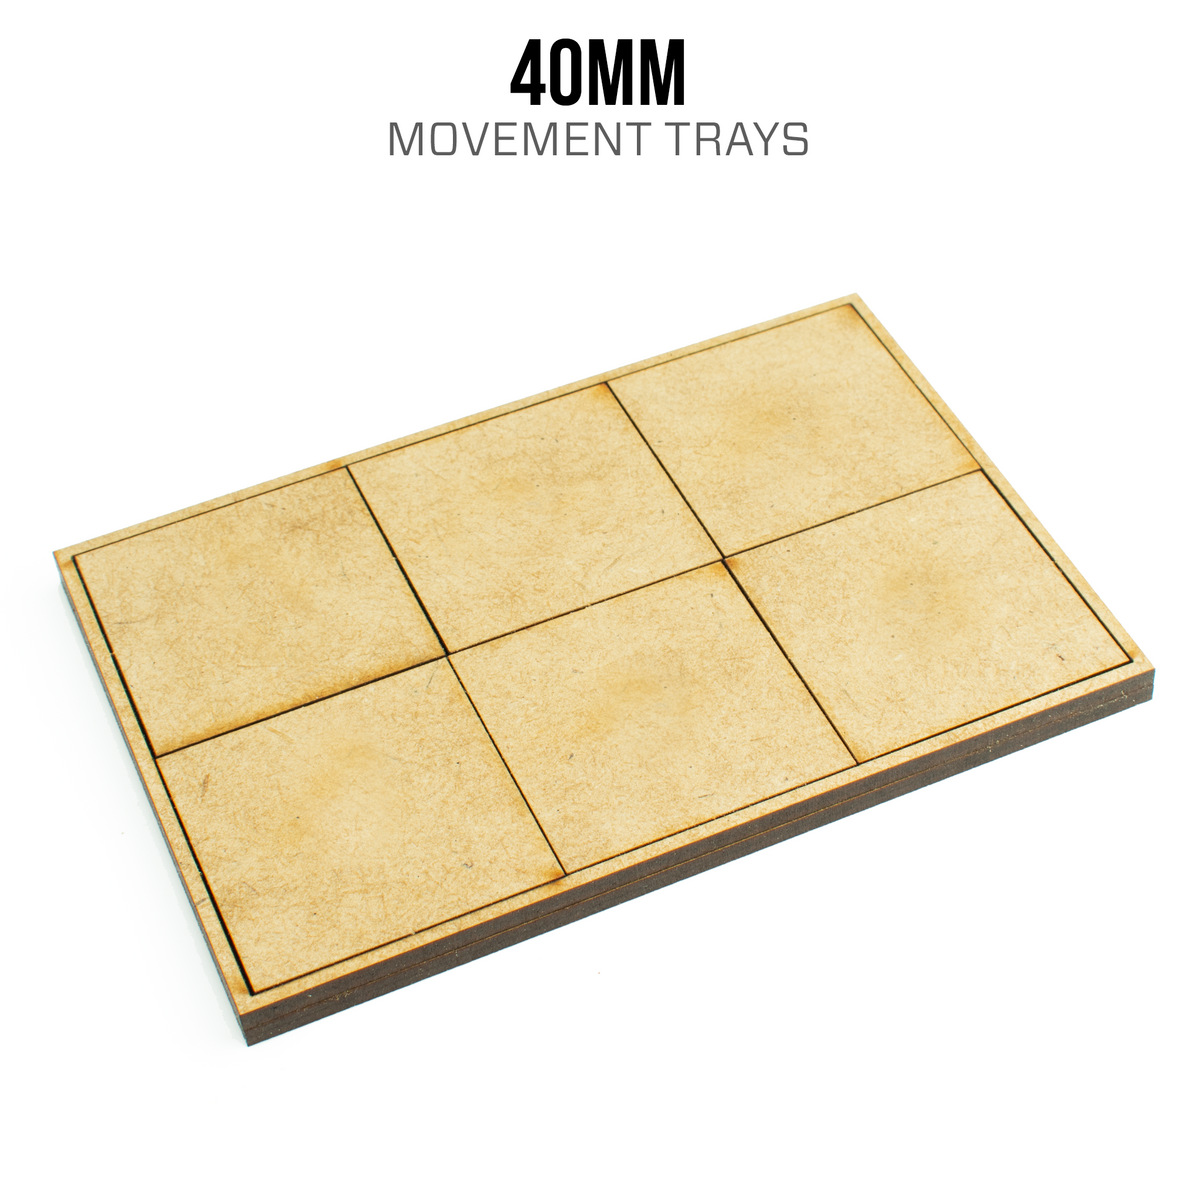 40mm Monstrous Infantry Movement Trays